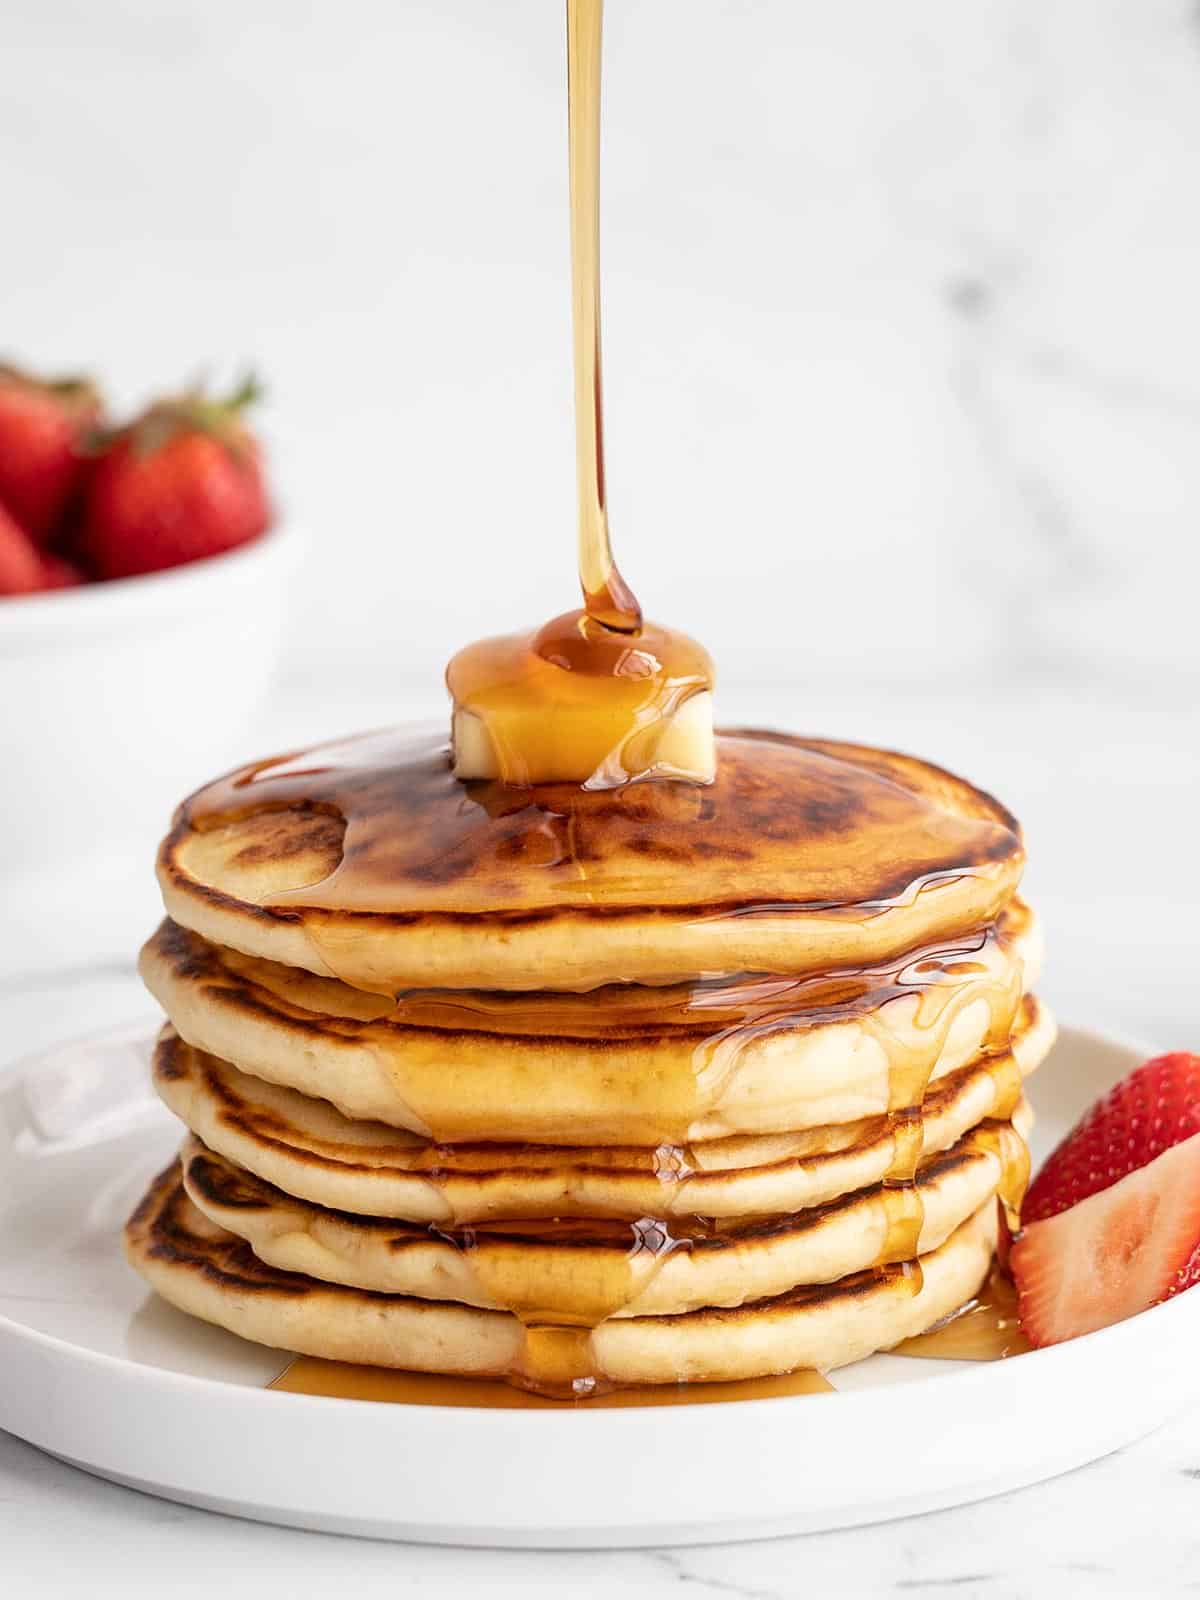 Is Butter or Oil Better for Cooking Eggs, Pancakes, and Other Foods?